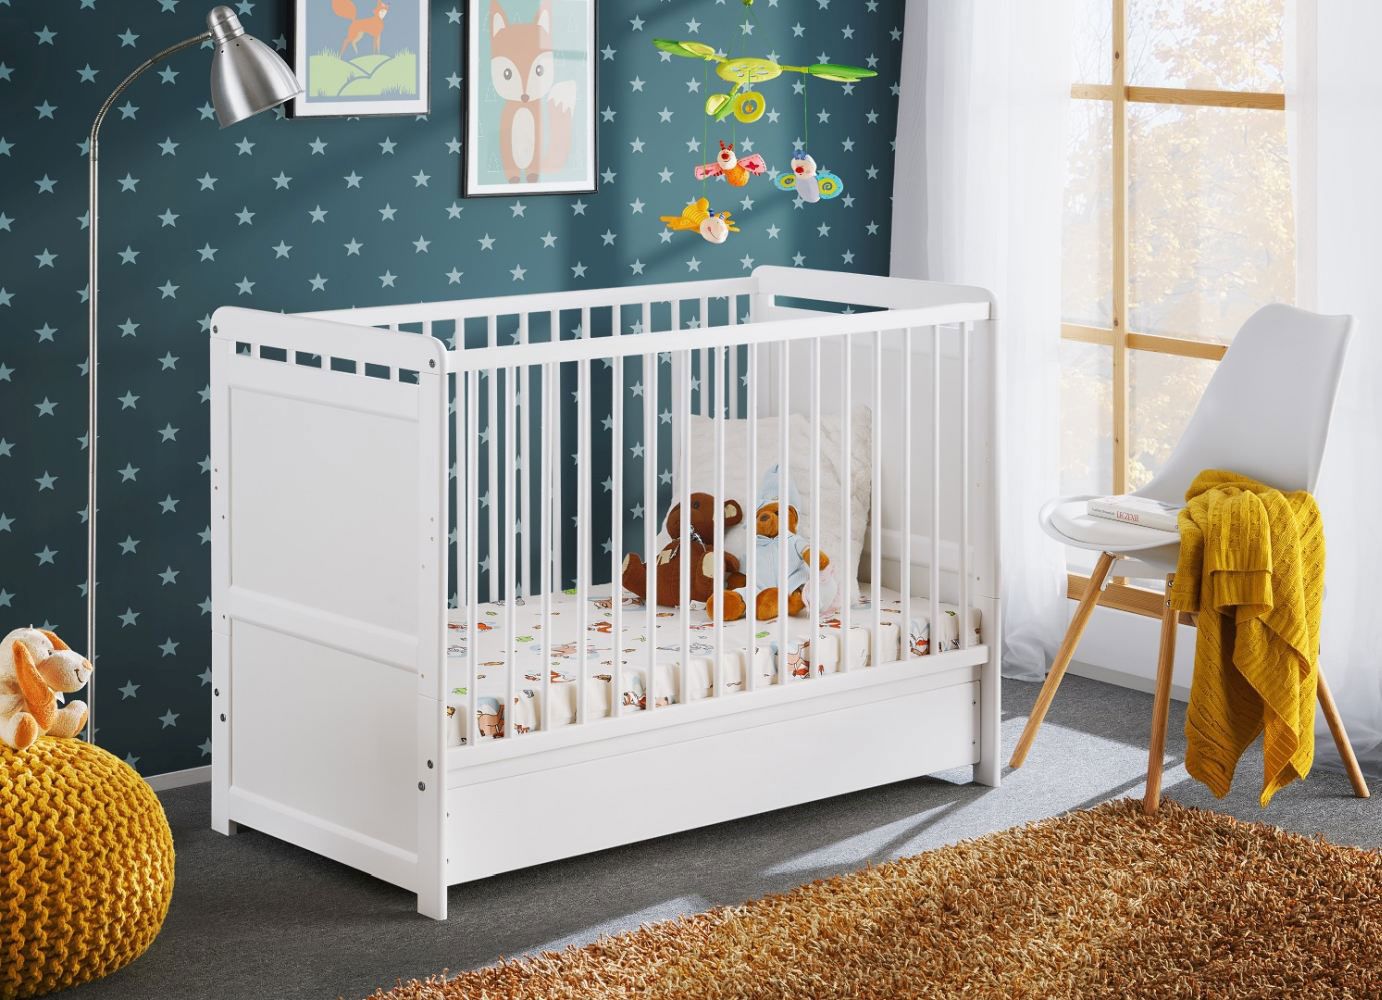 Baby crib / crib made of real pine wood Avaldsnes 12, color: white - Dimensions: 90 x 124 x 67 cm (H x W x D), with one drawer